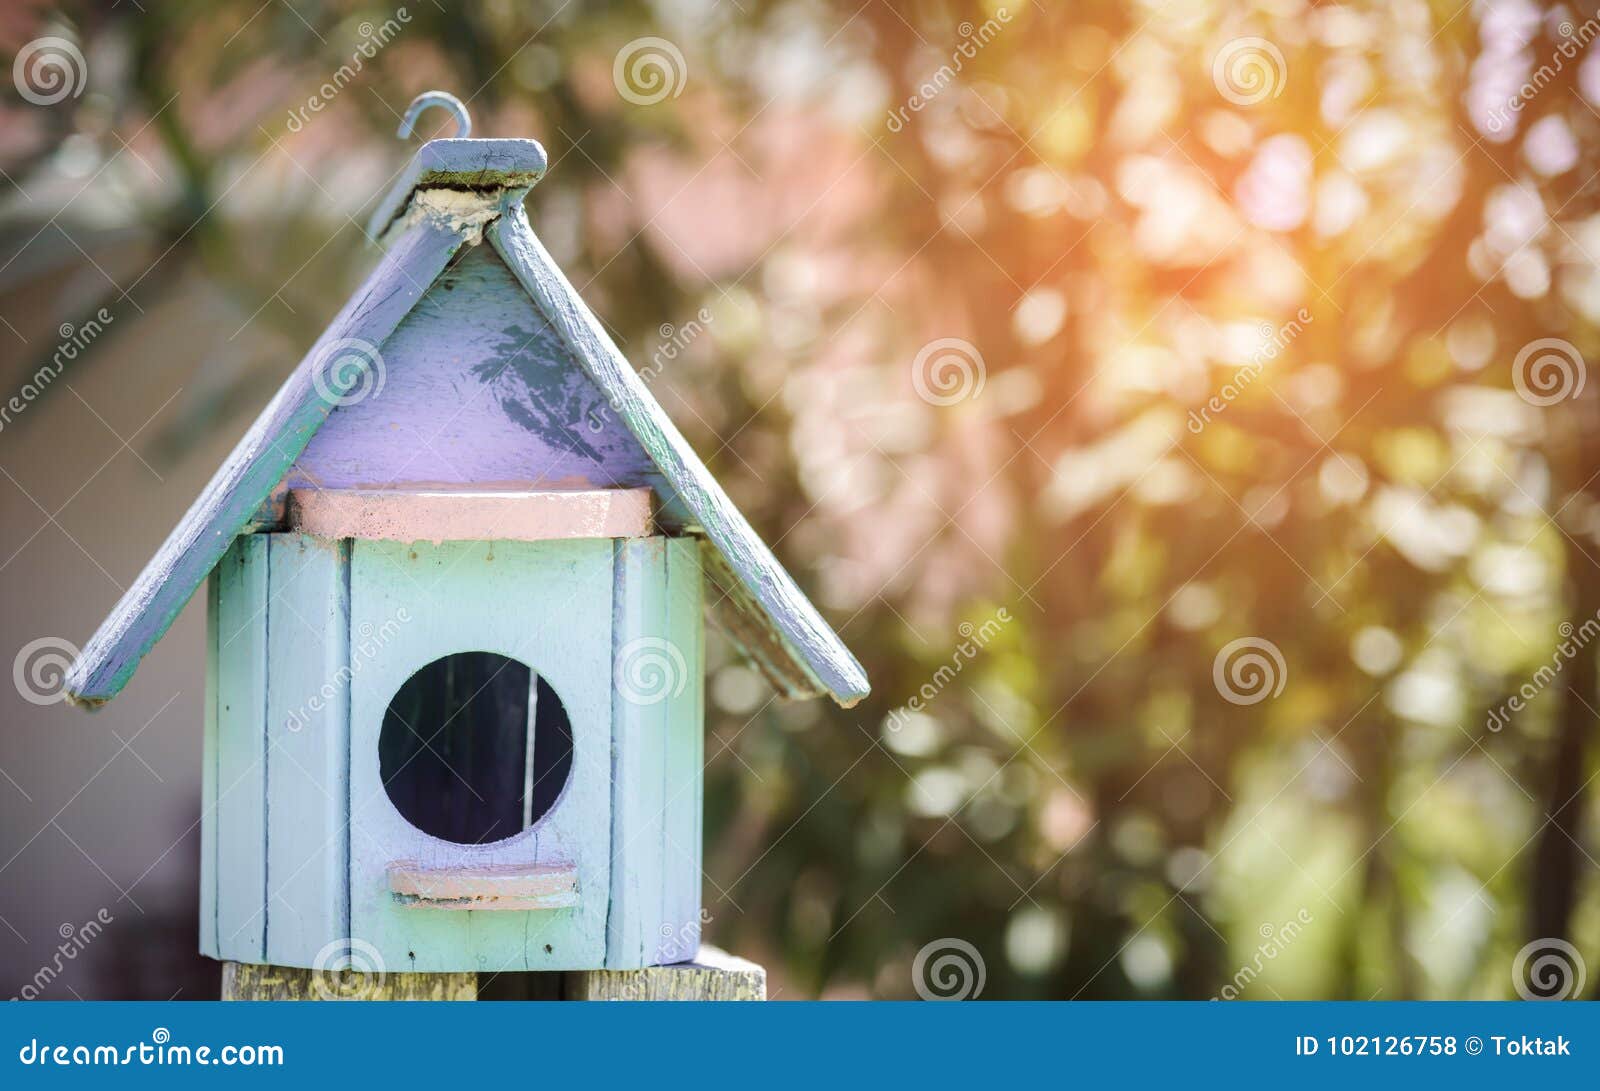 Cute Little Birdhouses Made From Old Wood Stock Photo 